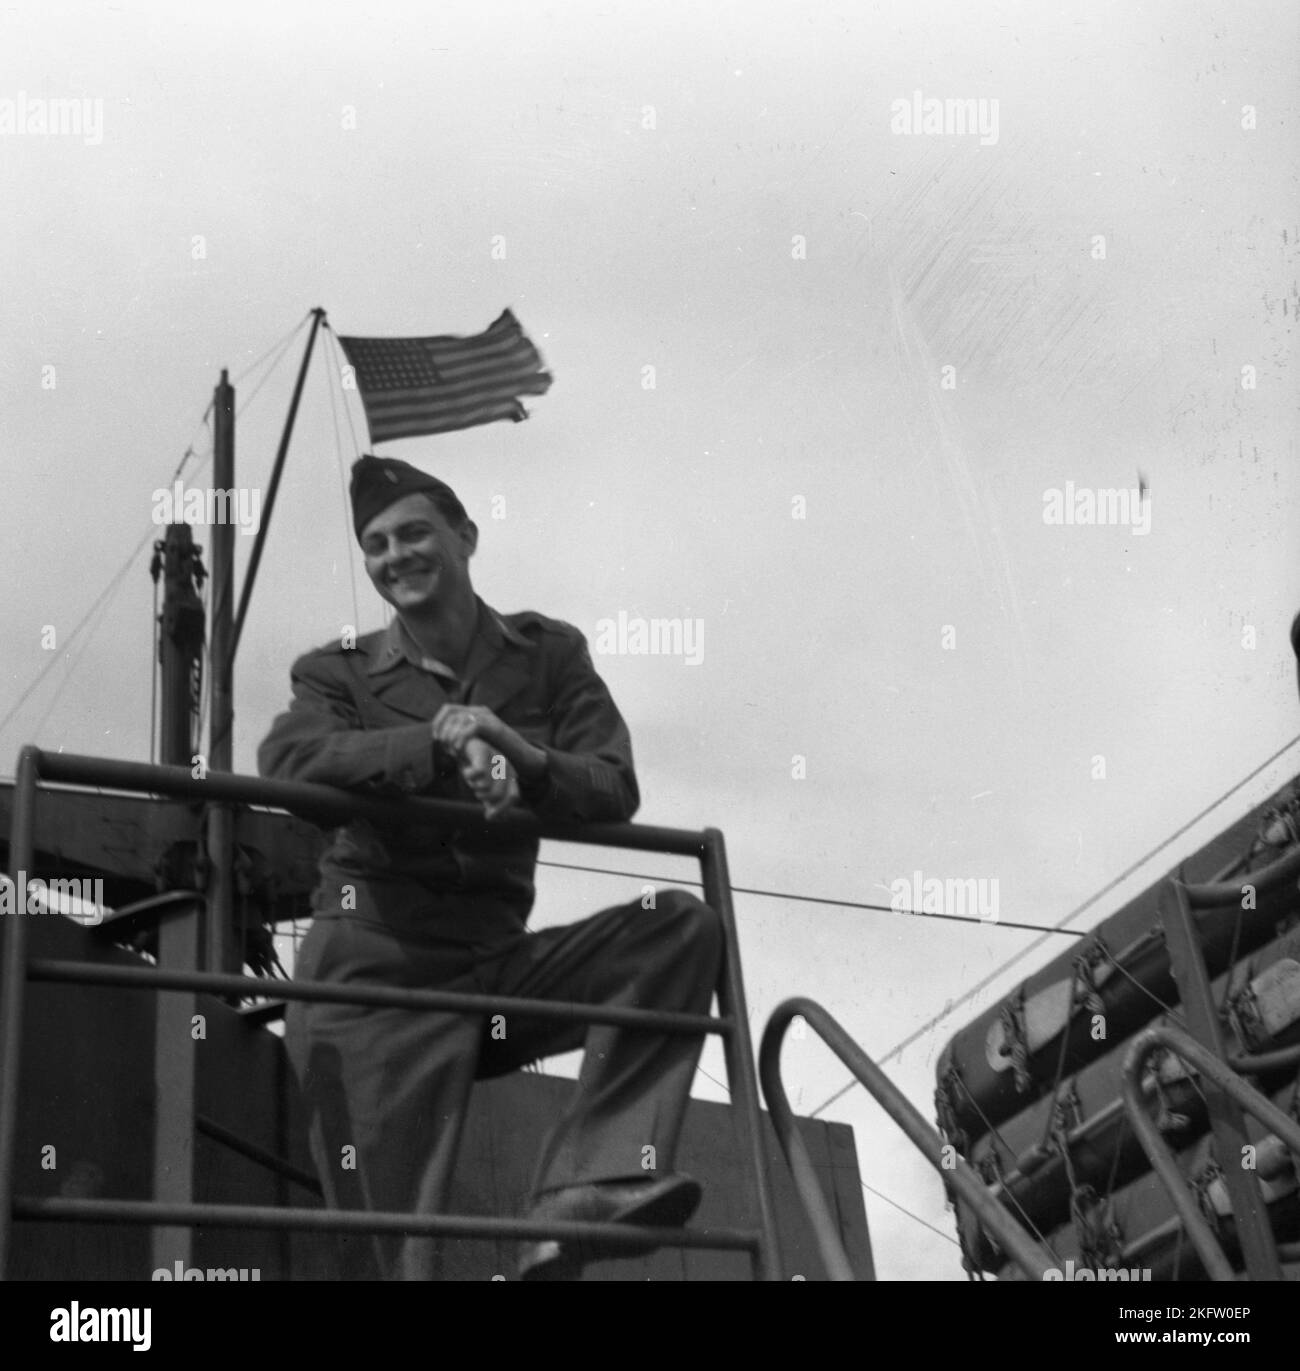 Happy man with American flag in background. United States Army veterans coming home on the Elgin Victory ship at the conclusion of World War II. SS Elgin Victory, a type VC2-S-AP2 Victory ship built by Permanente Metals Stock Photo